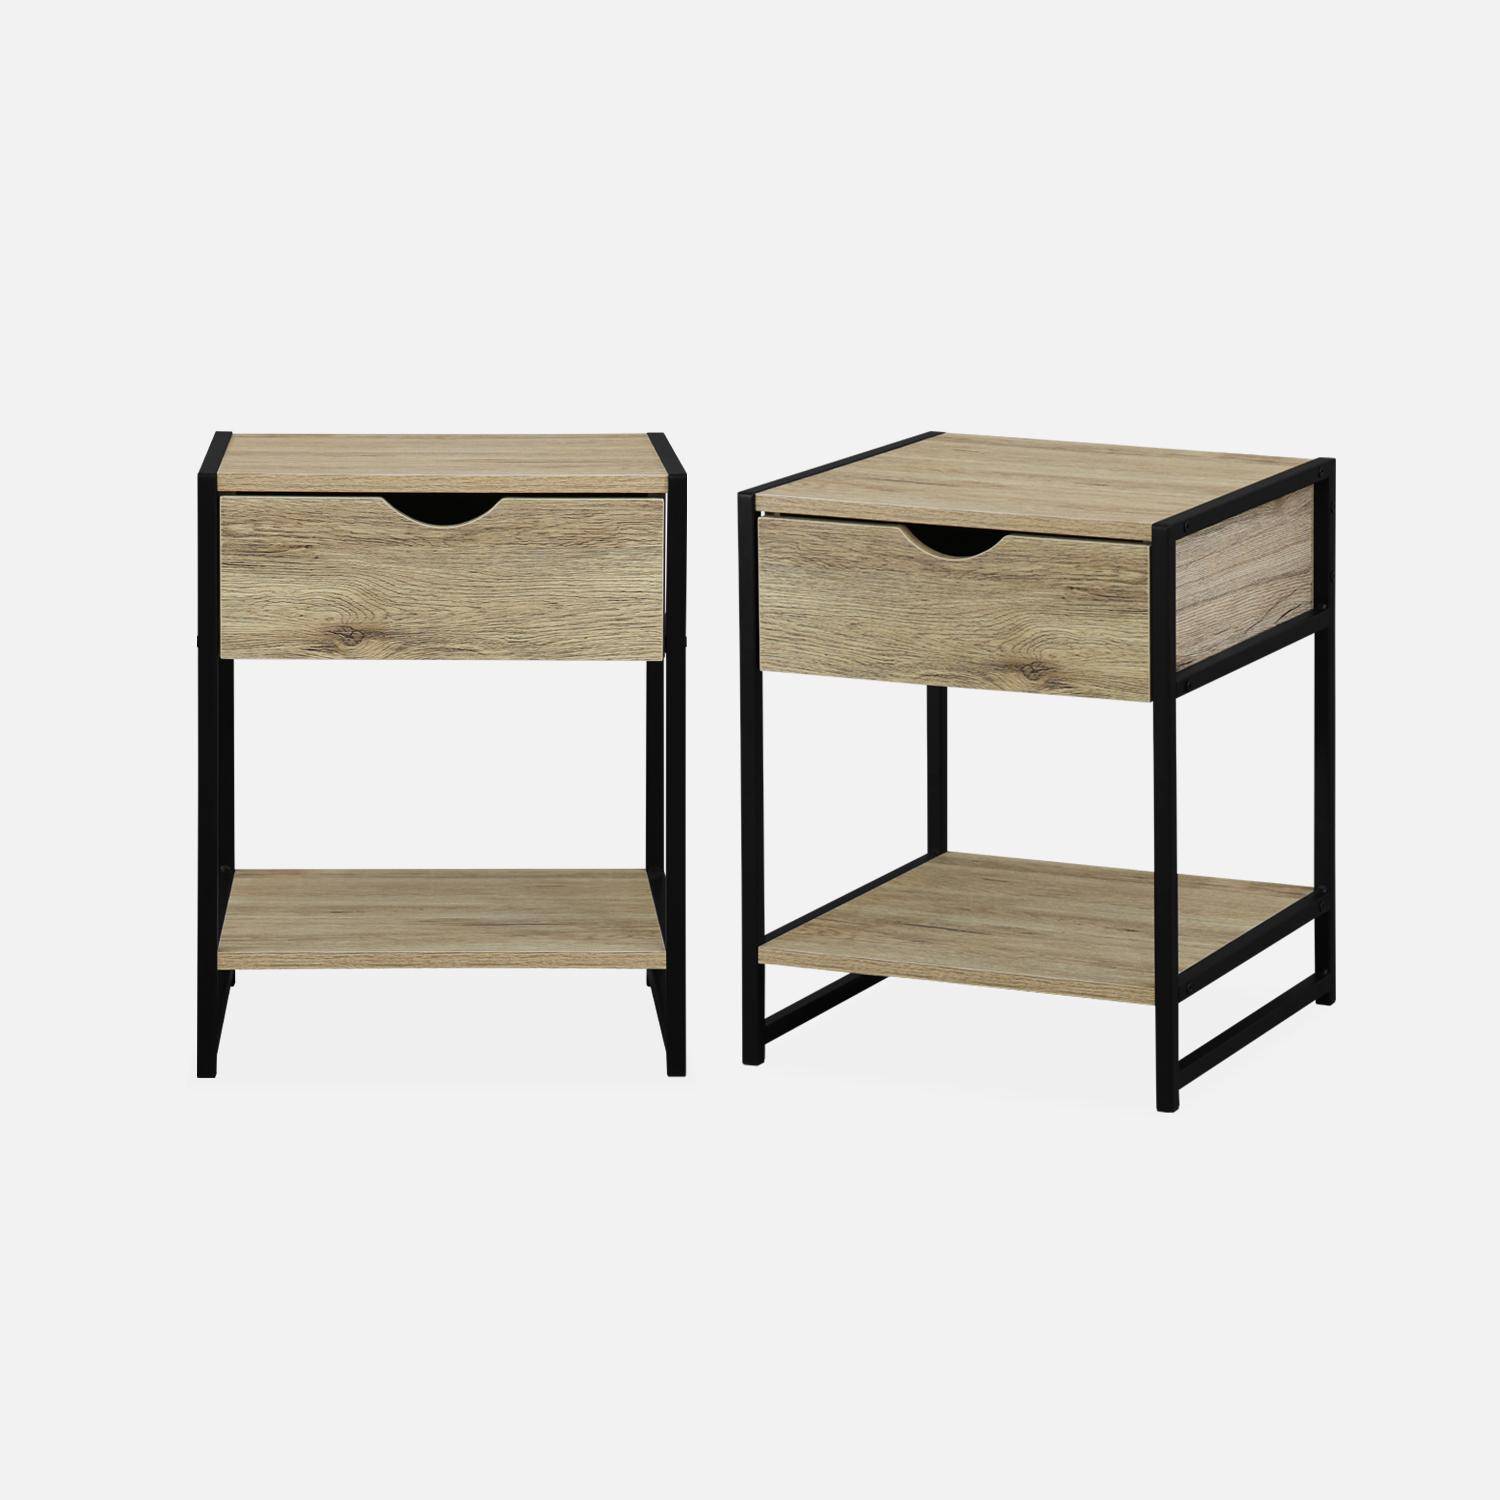 Pair of metal and wood-effect bedside tables with drawer and shelf, 40x40x50cm - Loft,sweeek,Photo4